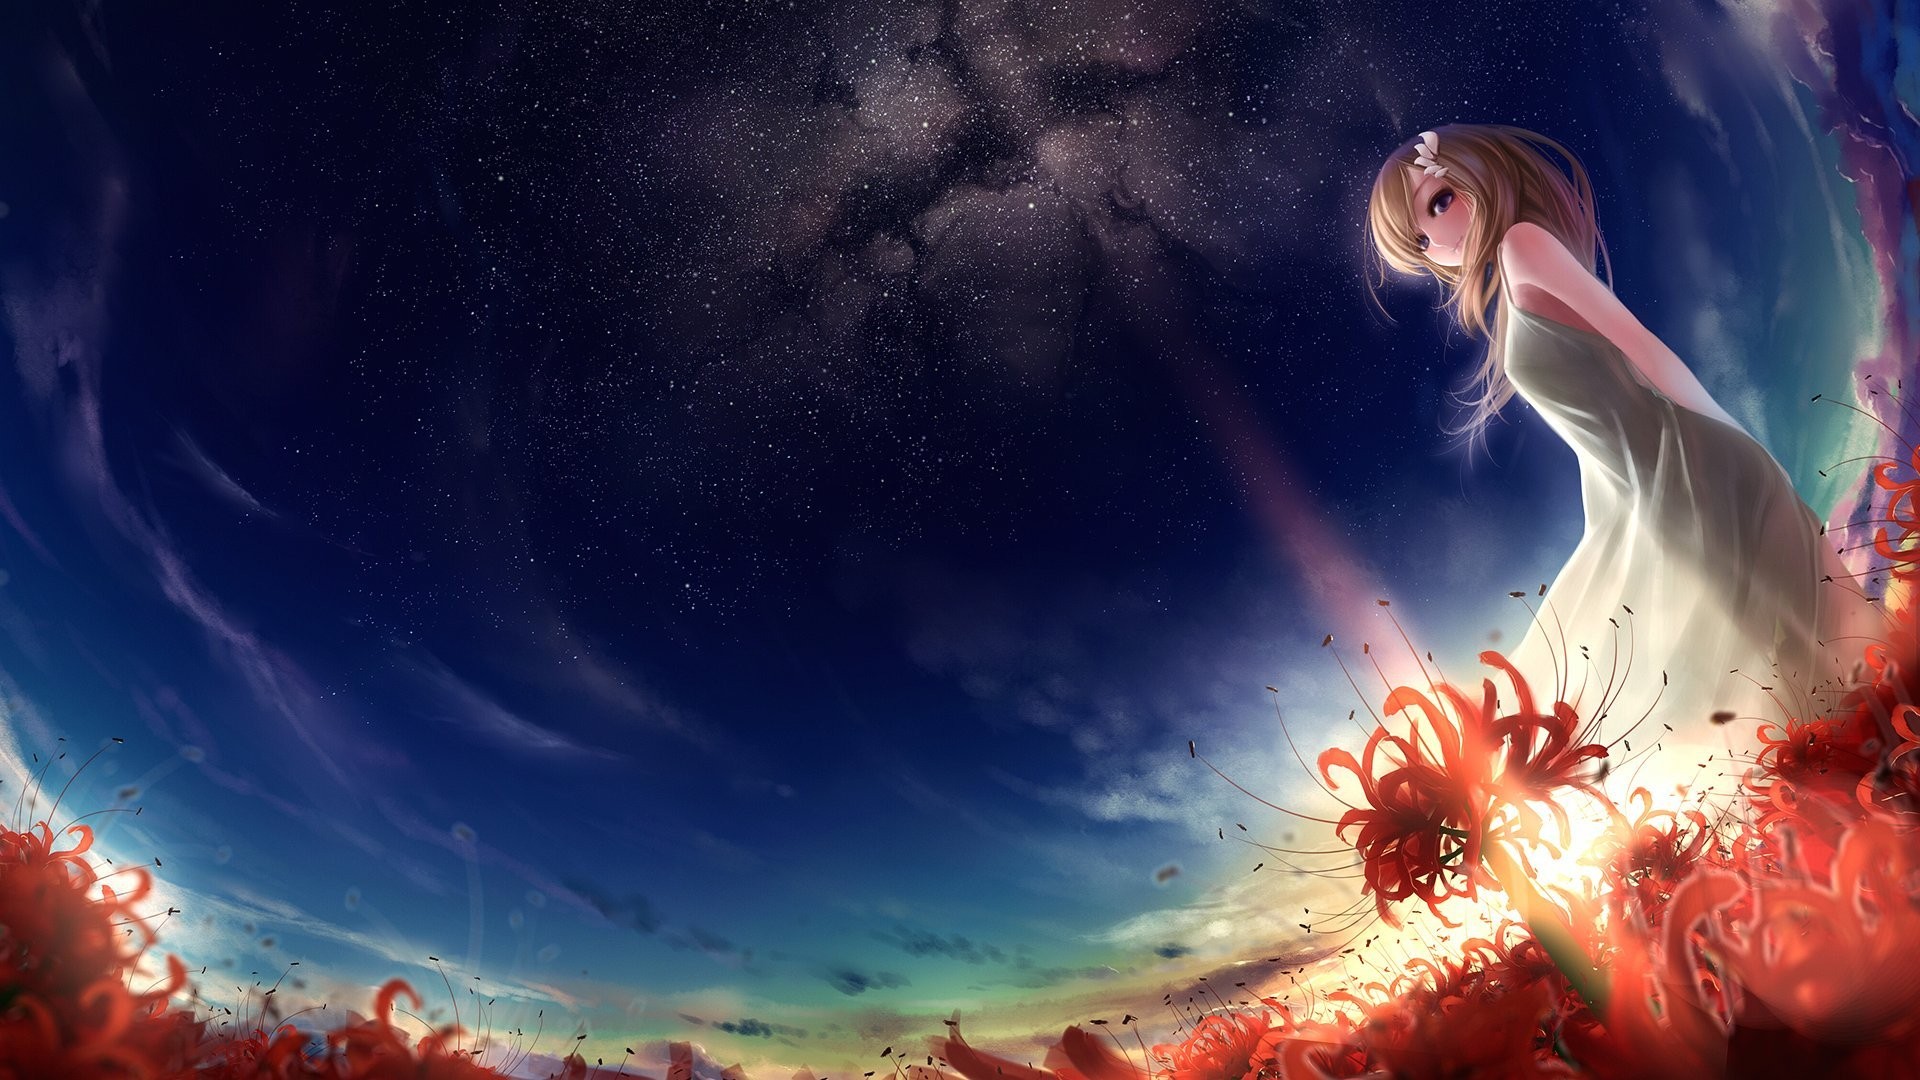 37+ Awesome anime wallpapers ·① Download free awesome HD wallpapers for desktop, mobile, laptop 